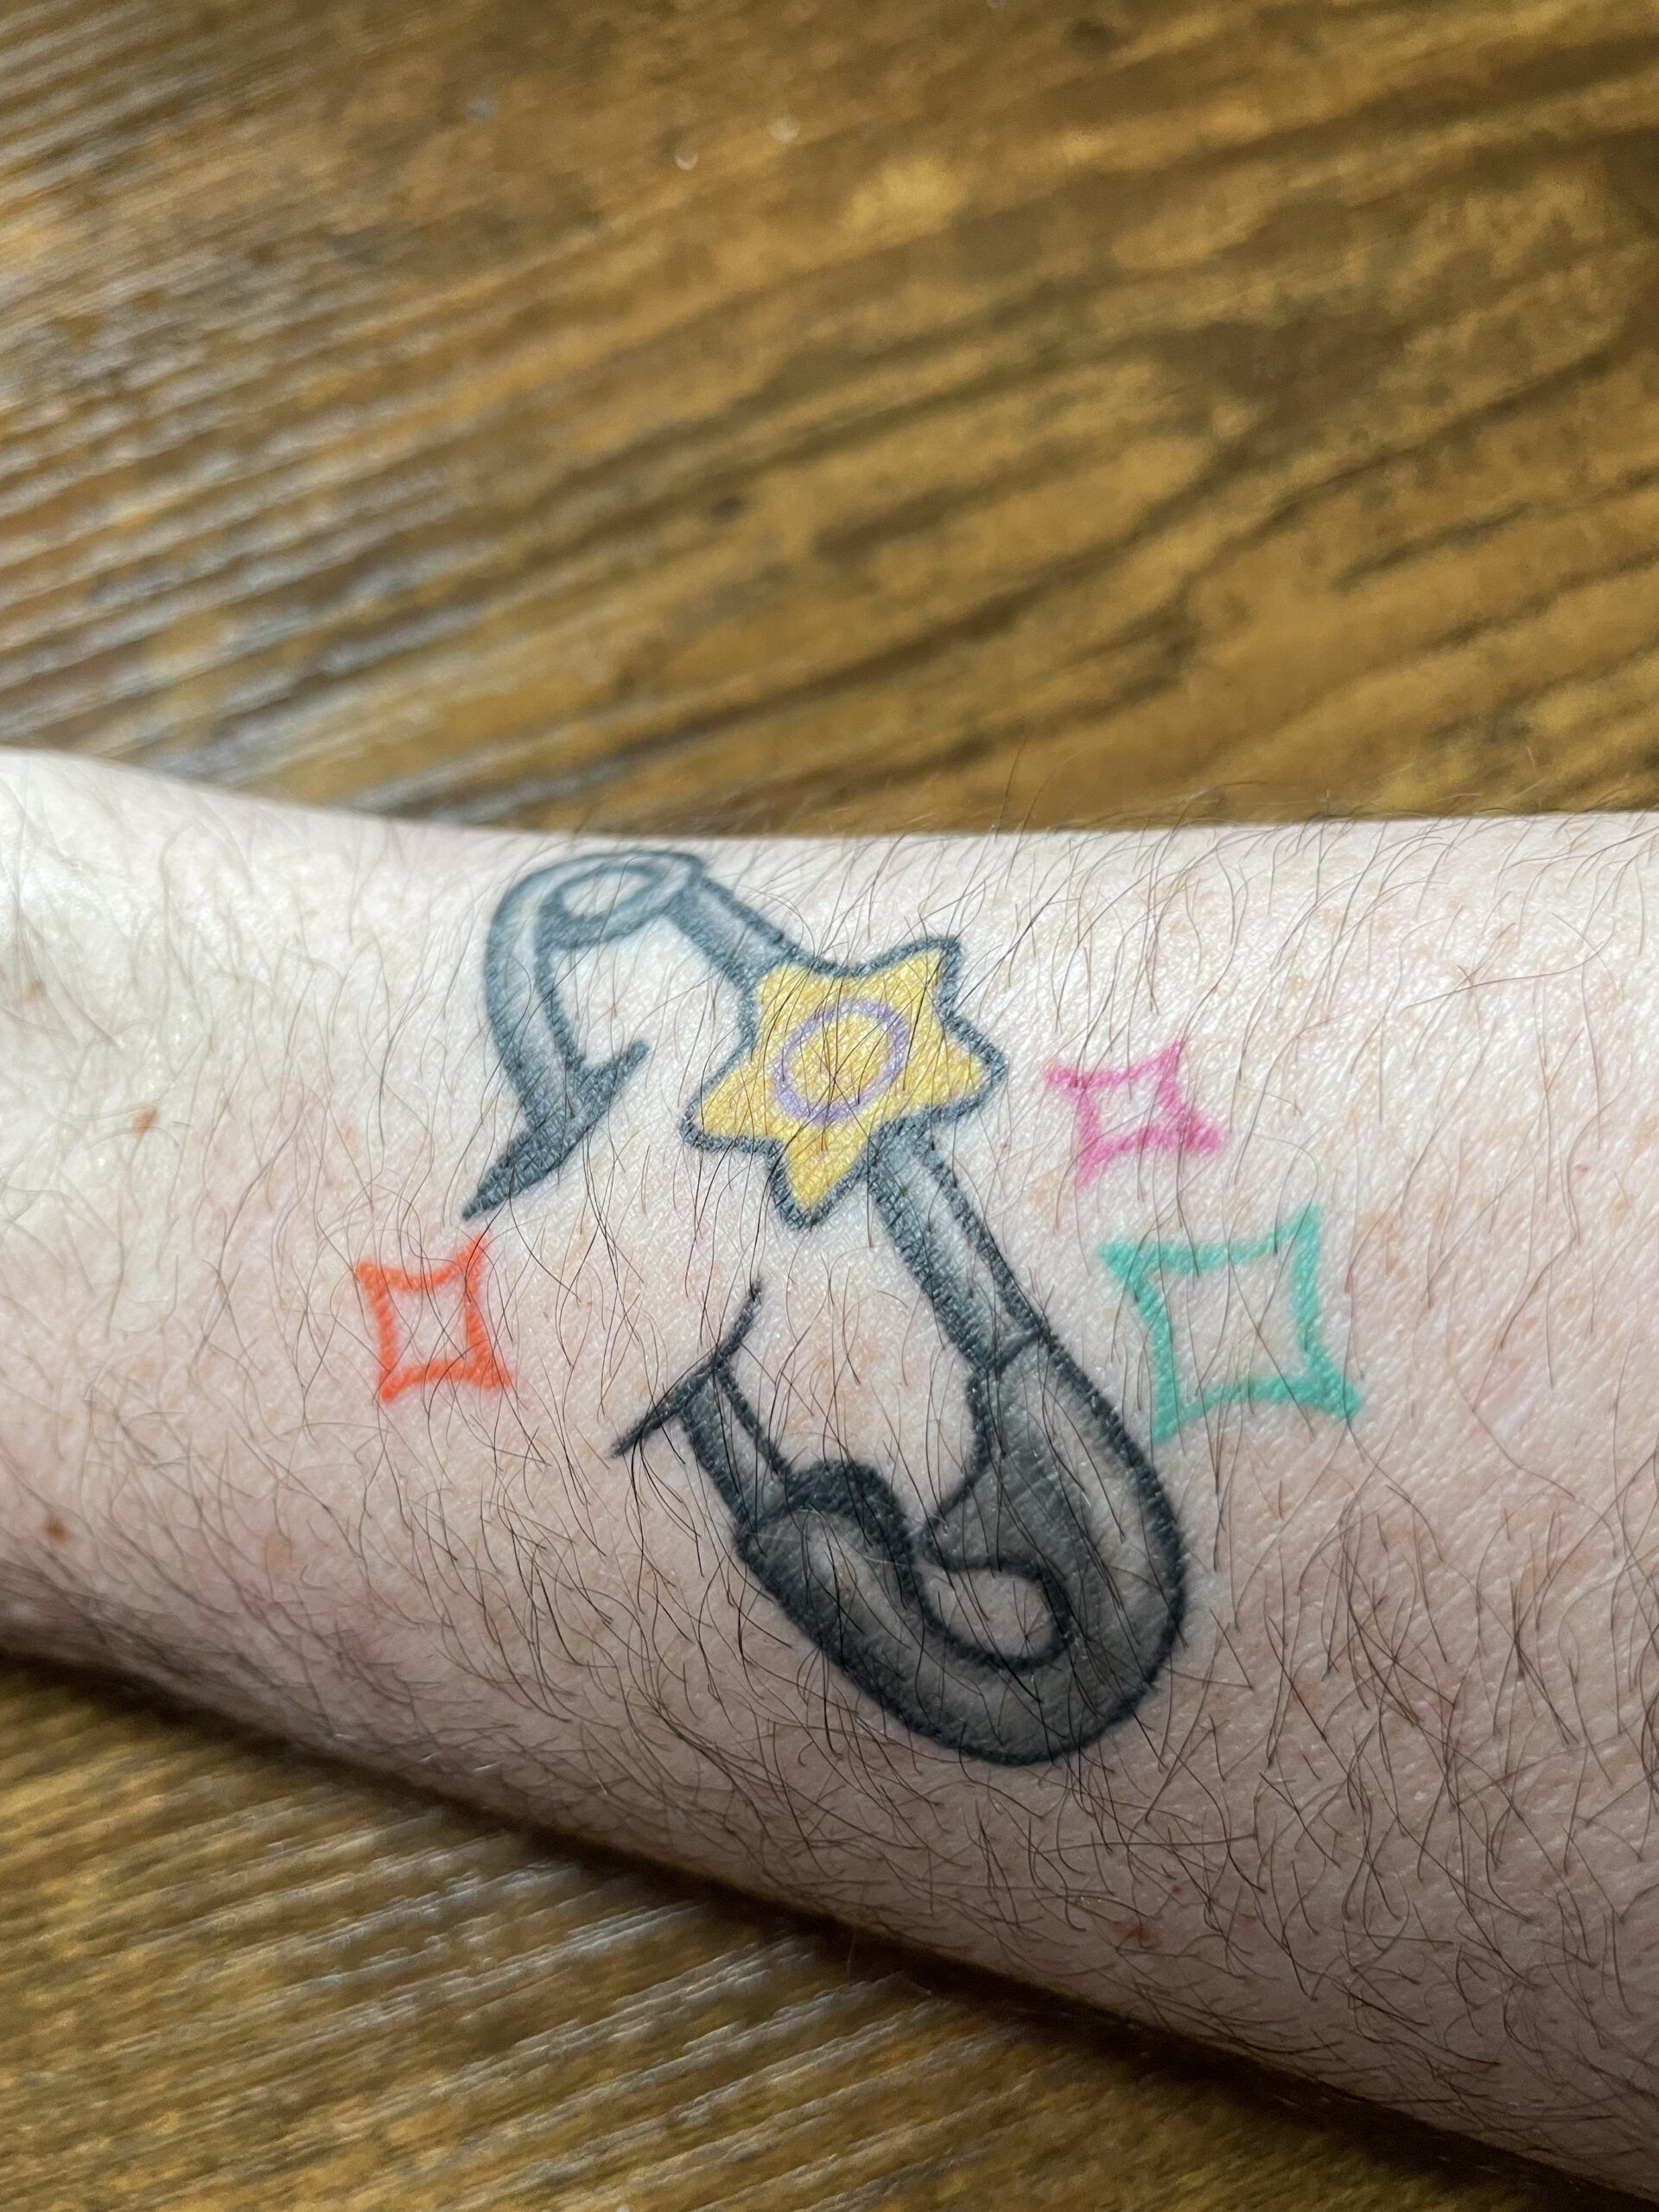 image of safety pin with intersex symbol tattoo